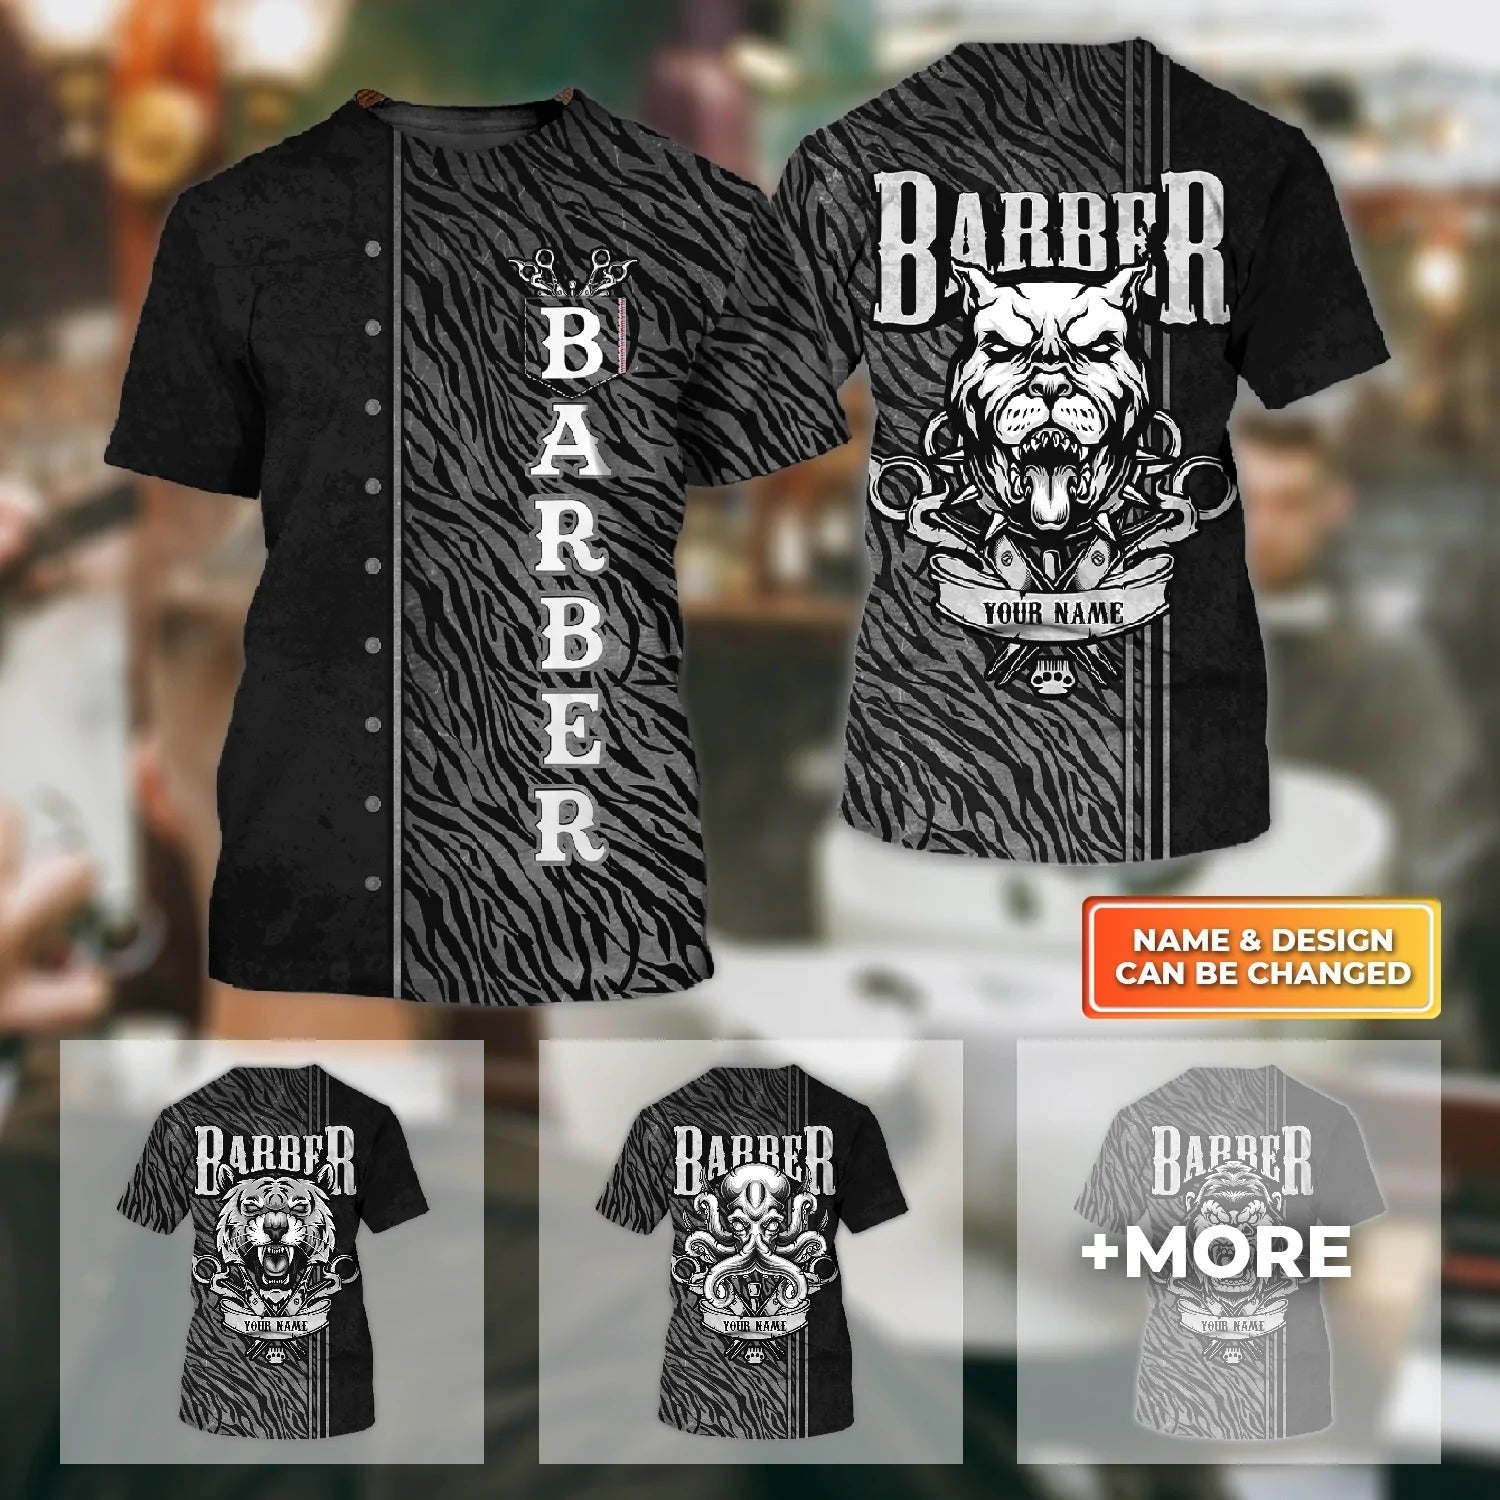 Personalized 3D All Over Print Barber Shirt/ Barber Shop Animal Gang Tshirt/ Barber Gift/ Barbershop Uniform